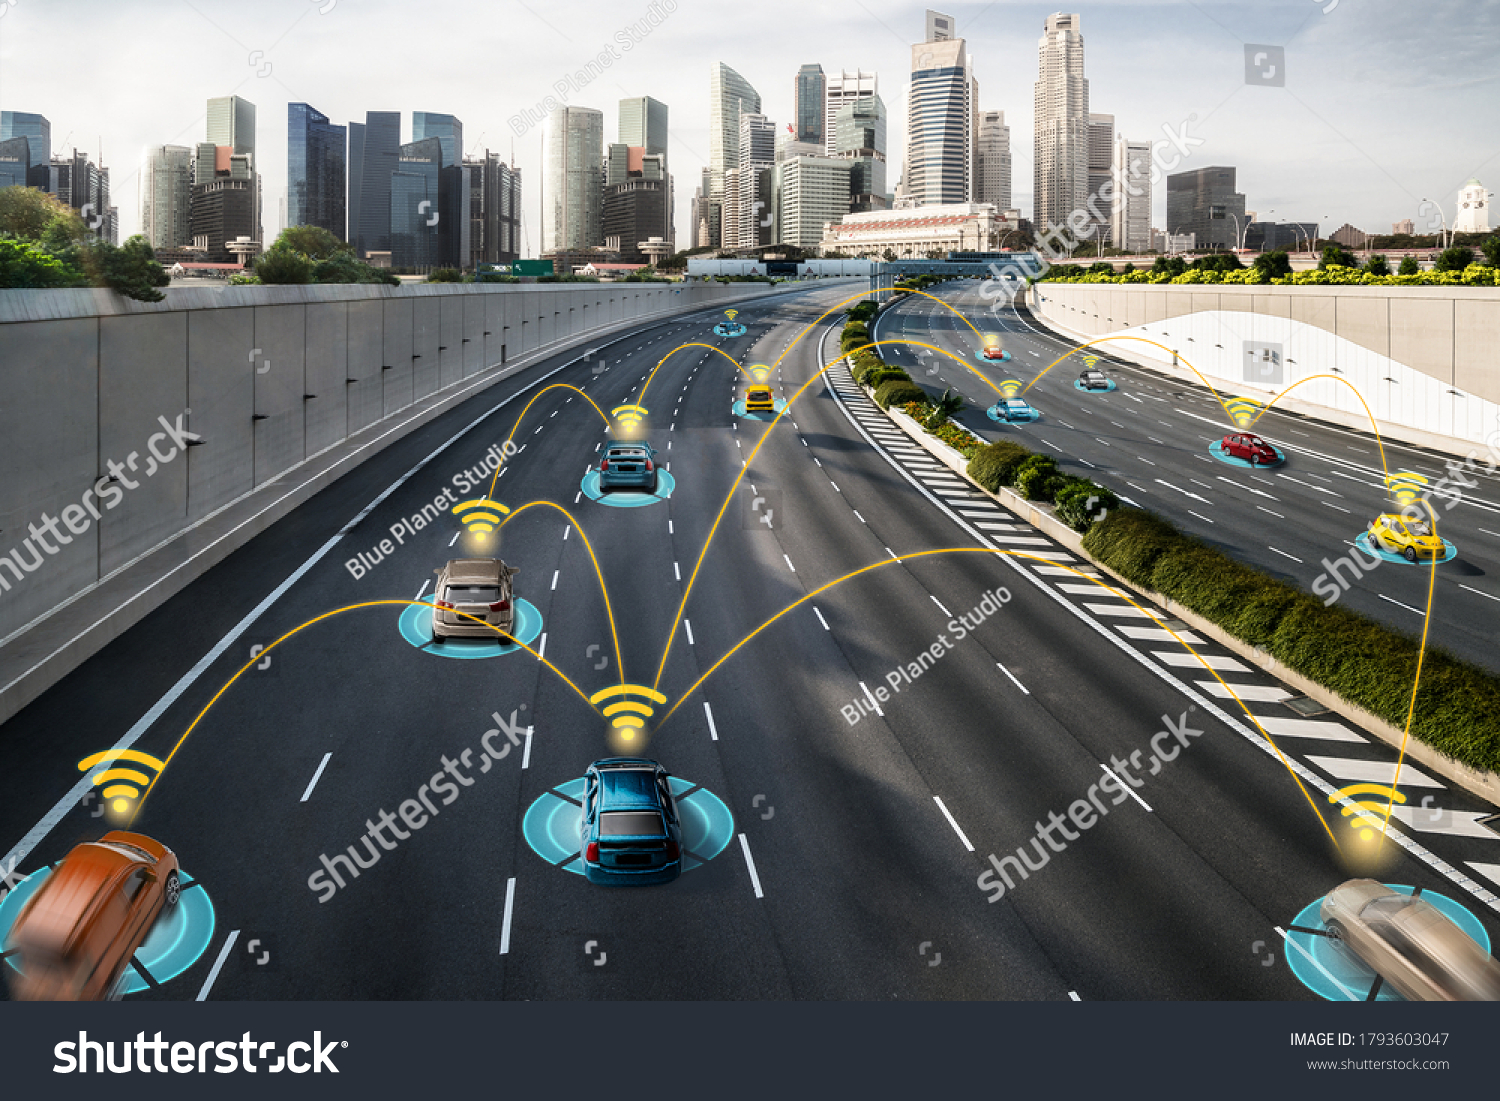 Autonomous car sensor system concept for safety of driverless mode car control . Future adaptive cruise control sensing nearby vehicle and pedestrian . Smart transportation technology . #1793603047